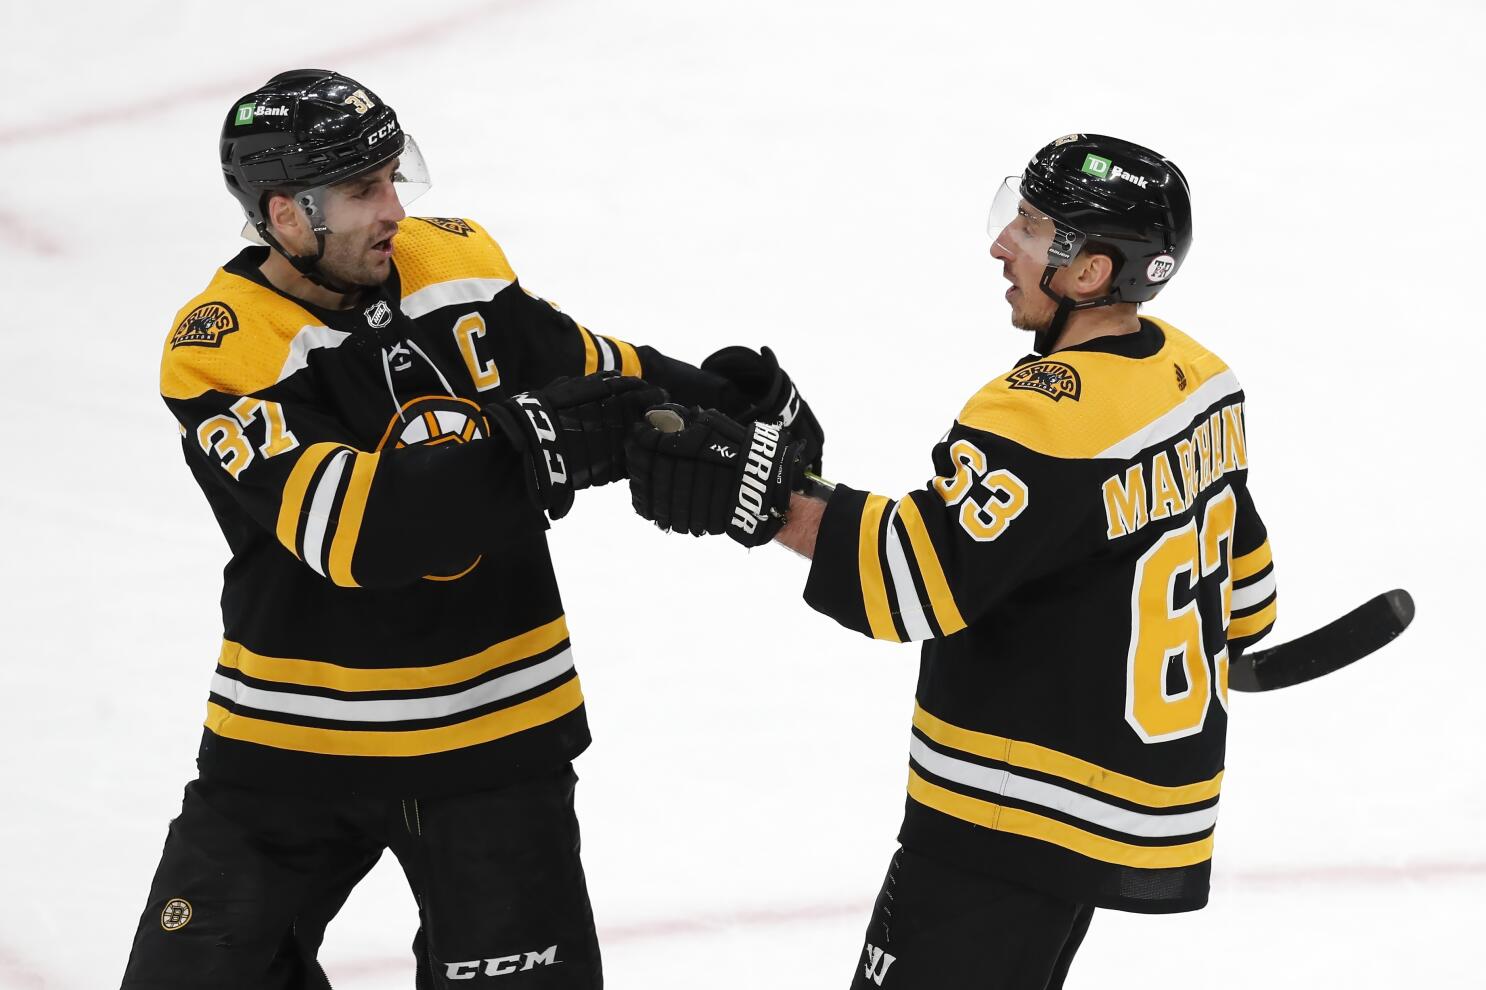 Caps edge Bruins in the shootout in Chara's return to Boston